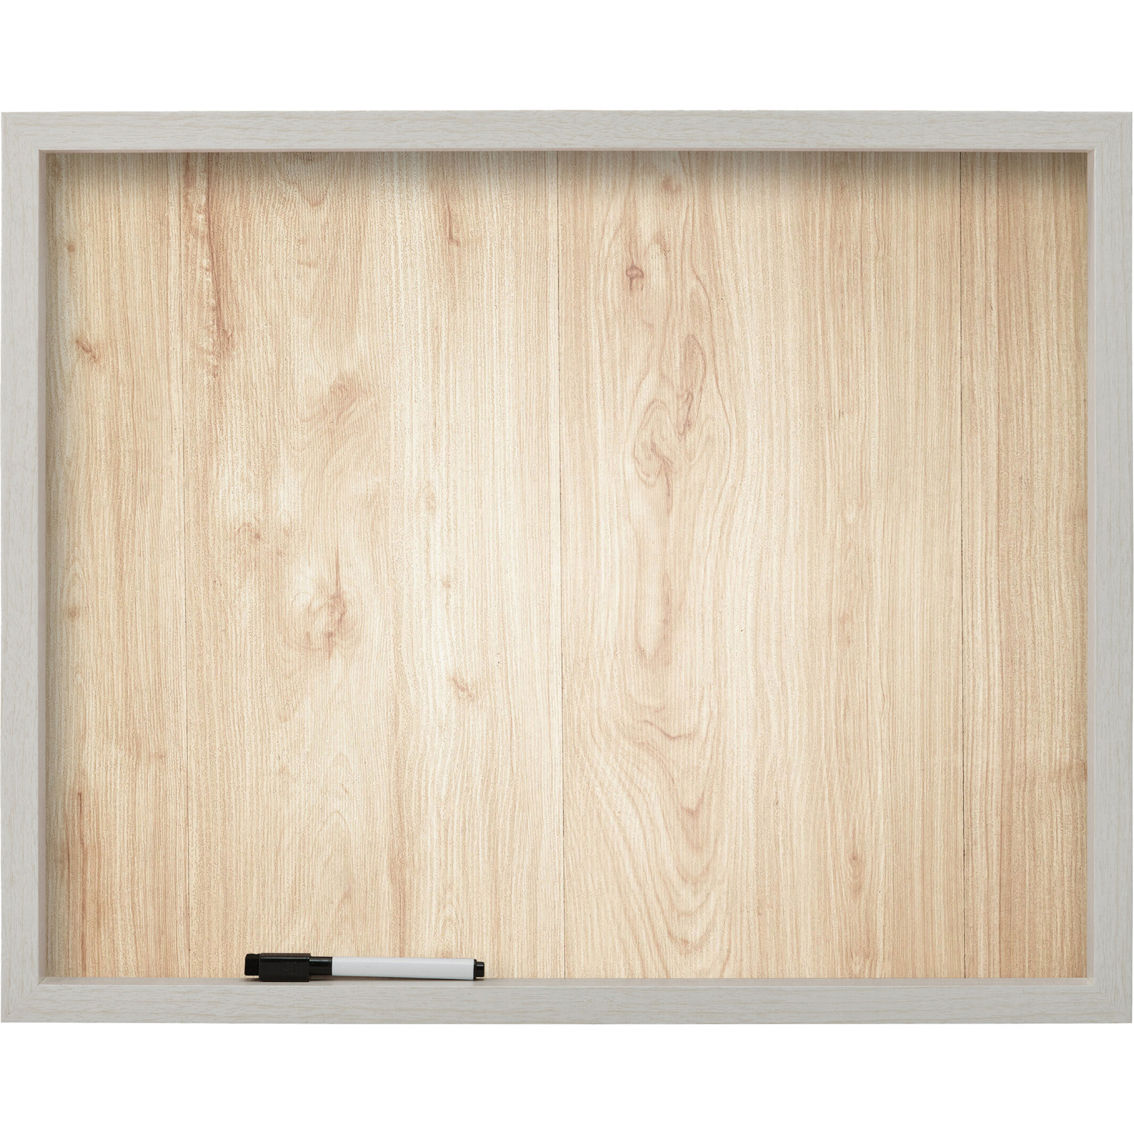 Mikasa Home 21 x 17 in. Natural Whiteboard with Pen - Image 2 of 5